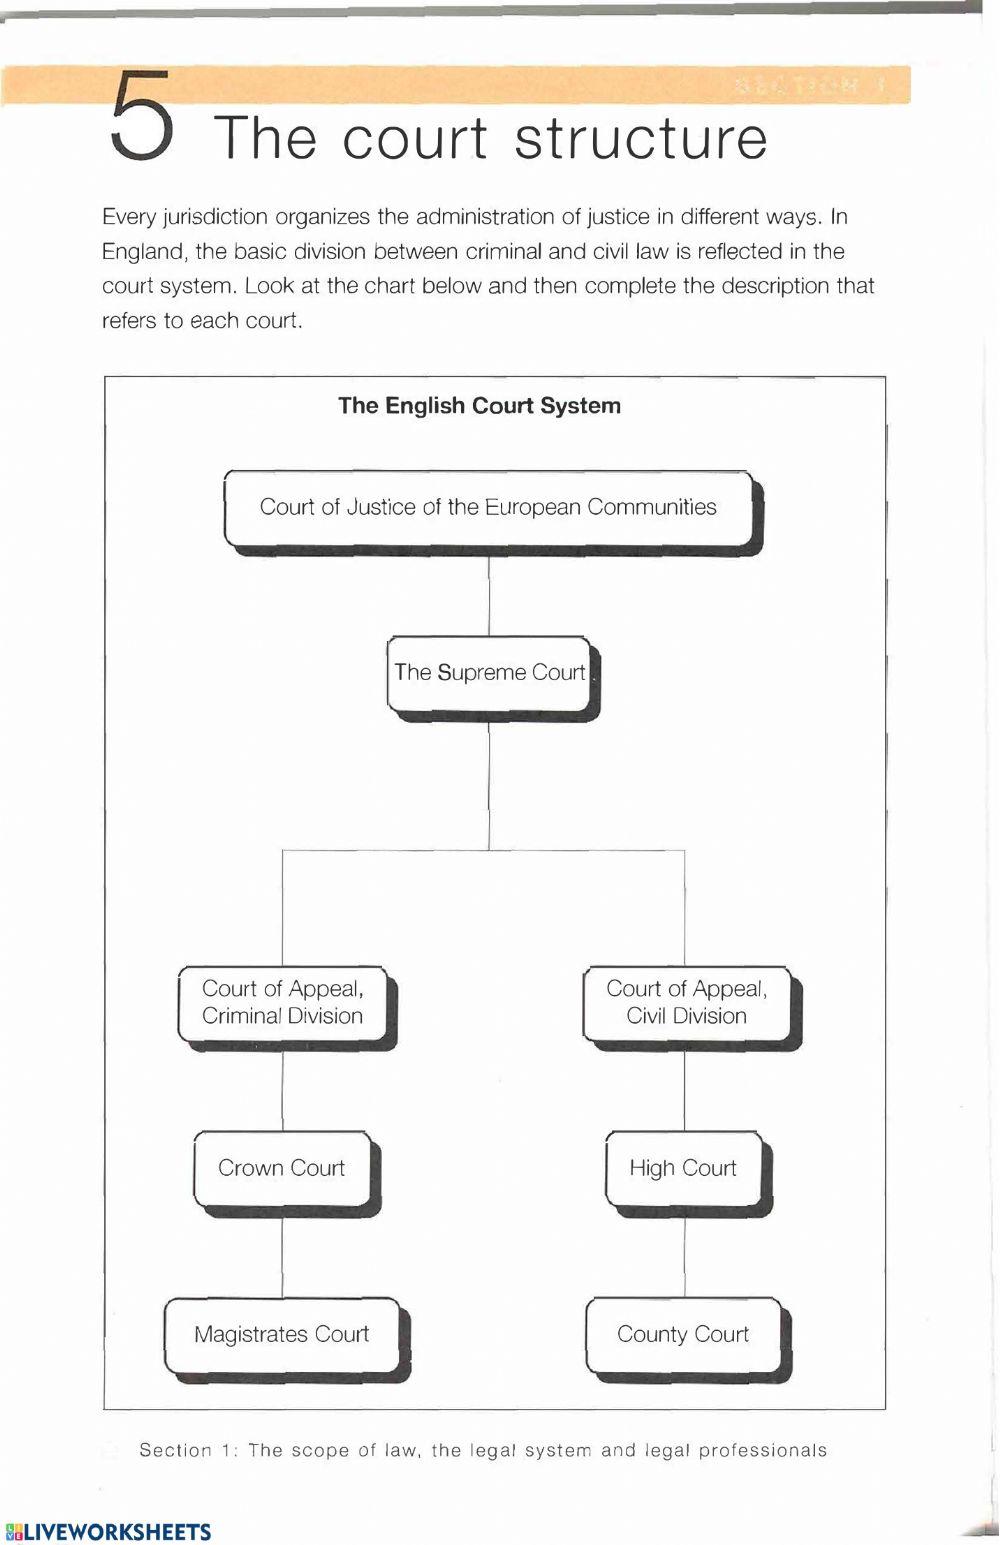 The English Court System